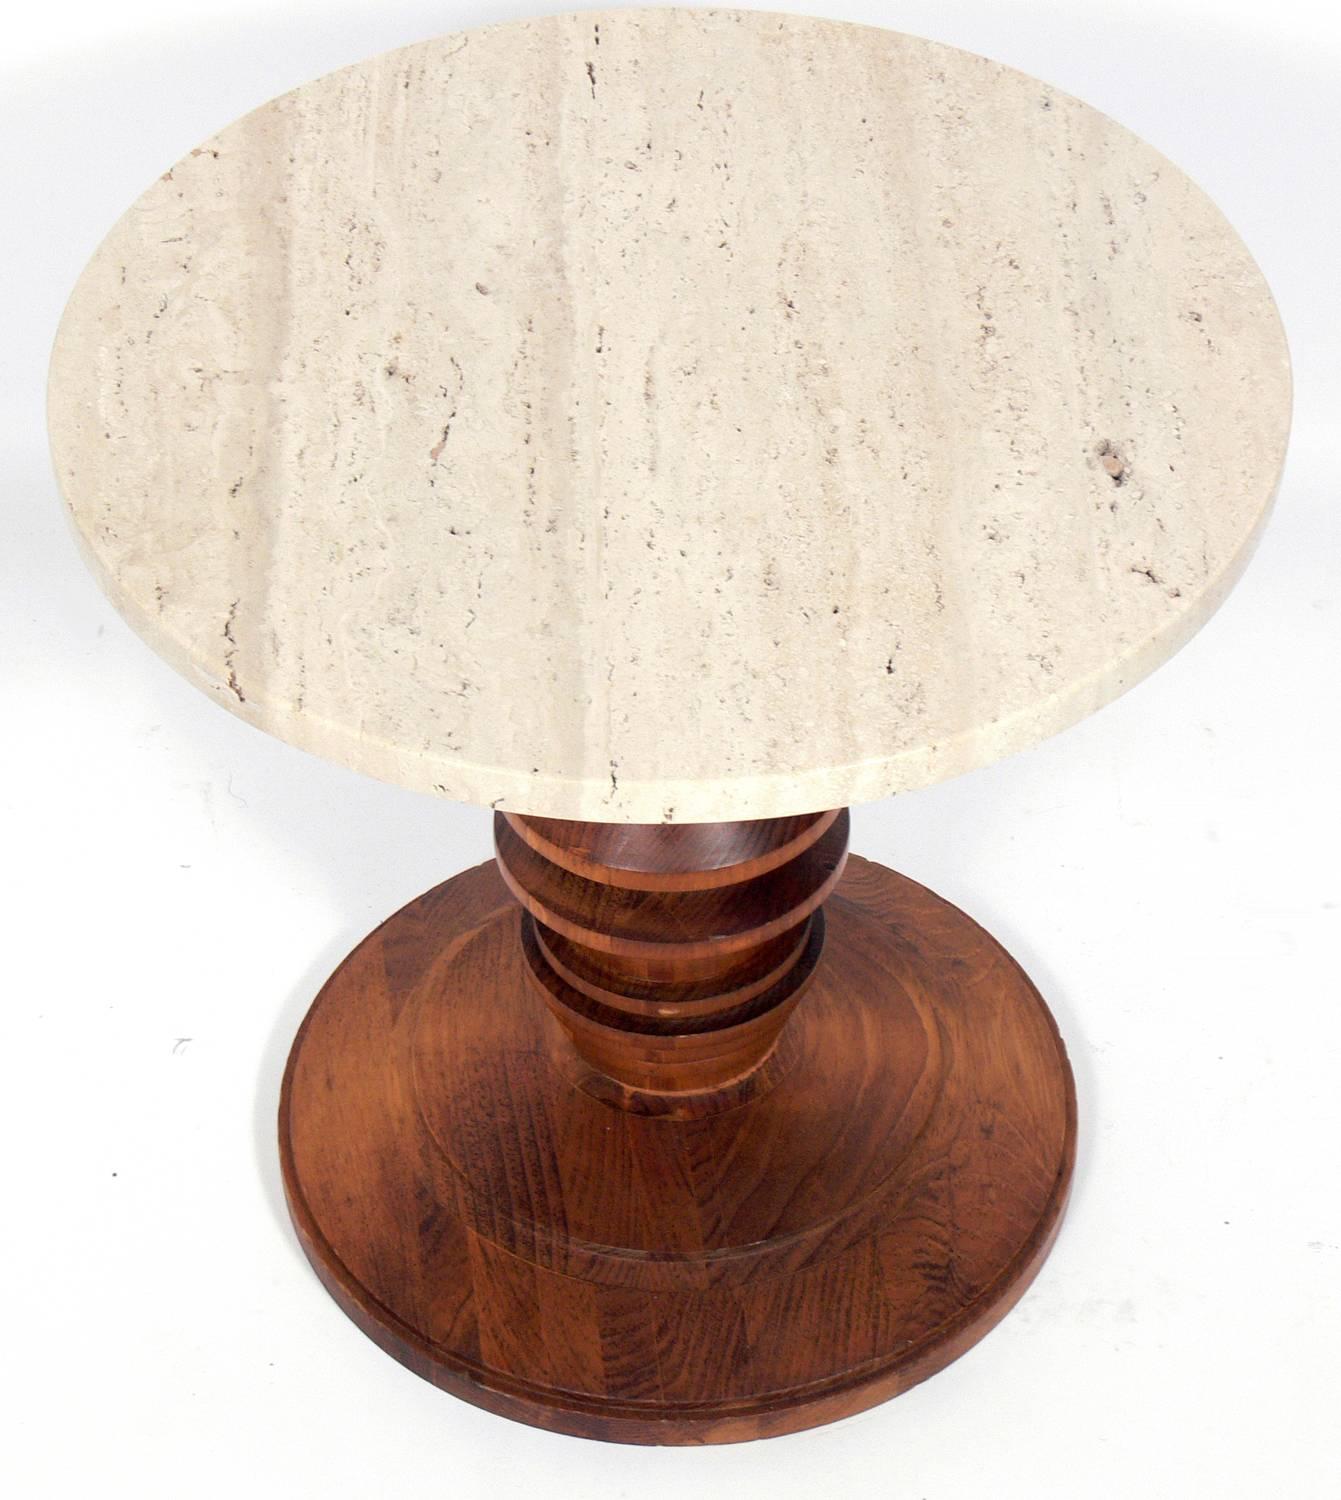 Mid-Century Modern travertine and walnut end or side table, American, circa 1950s. The walnut base of the table is very sculptural and is reminiscent of the 